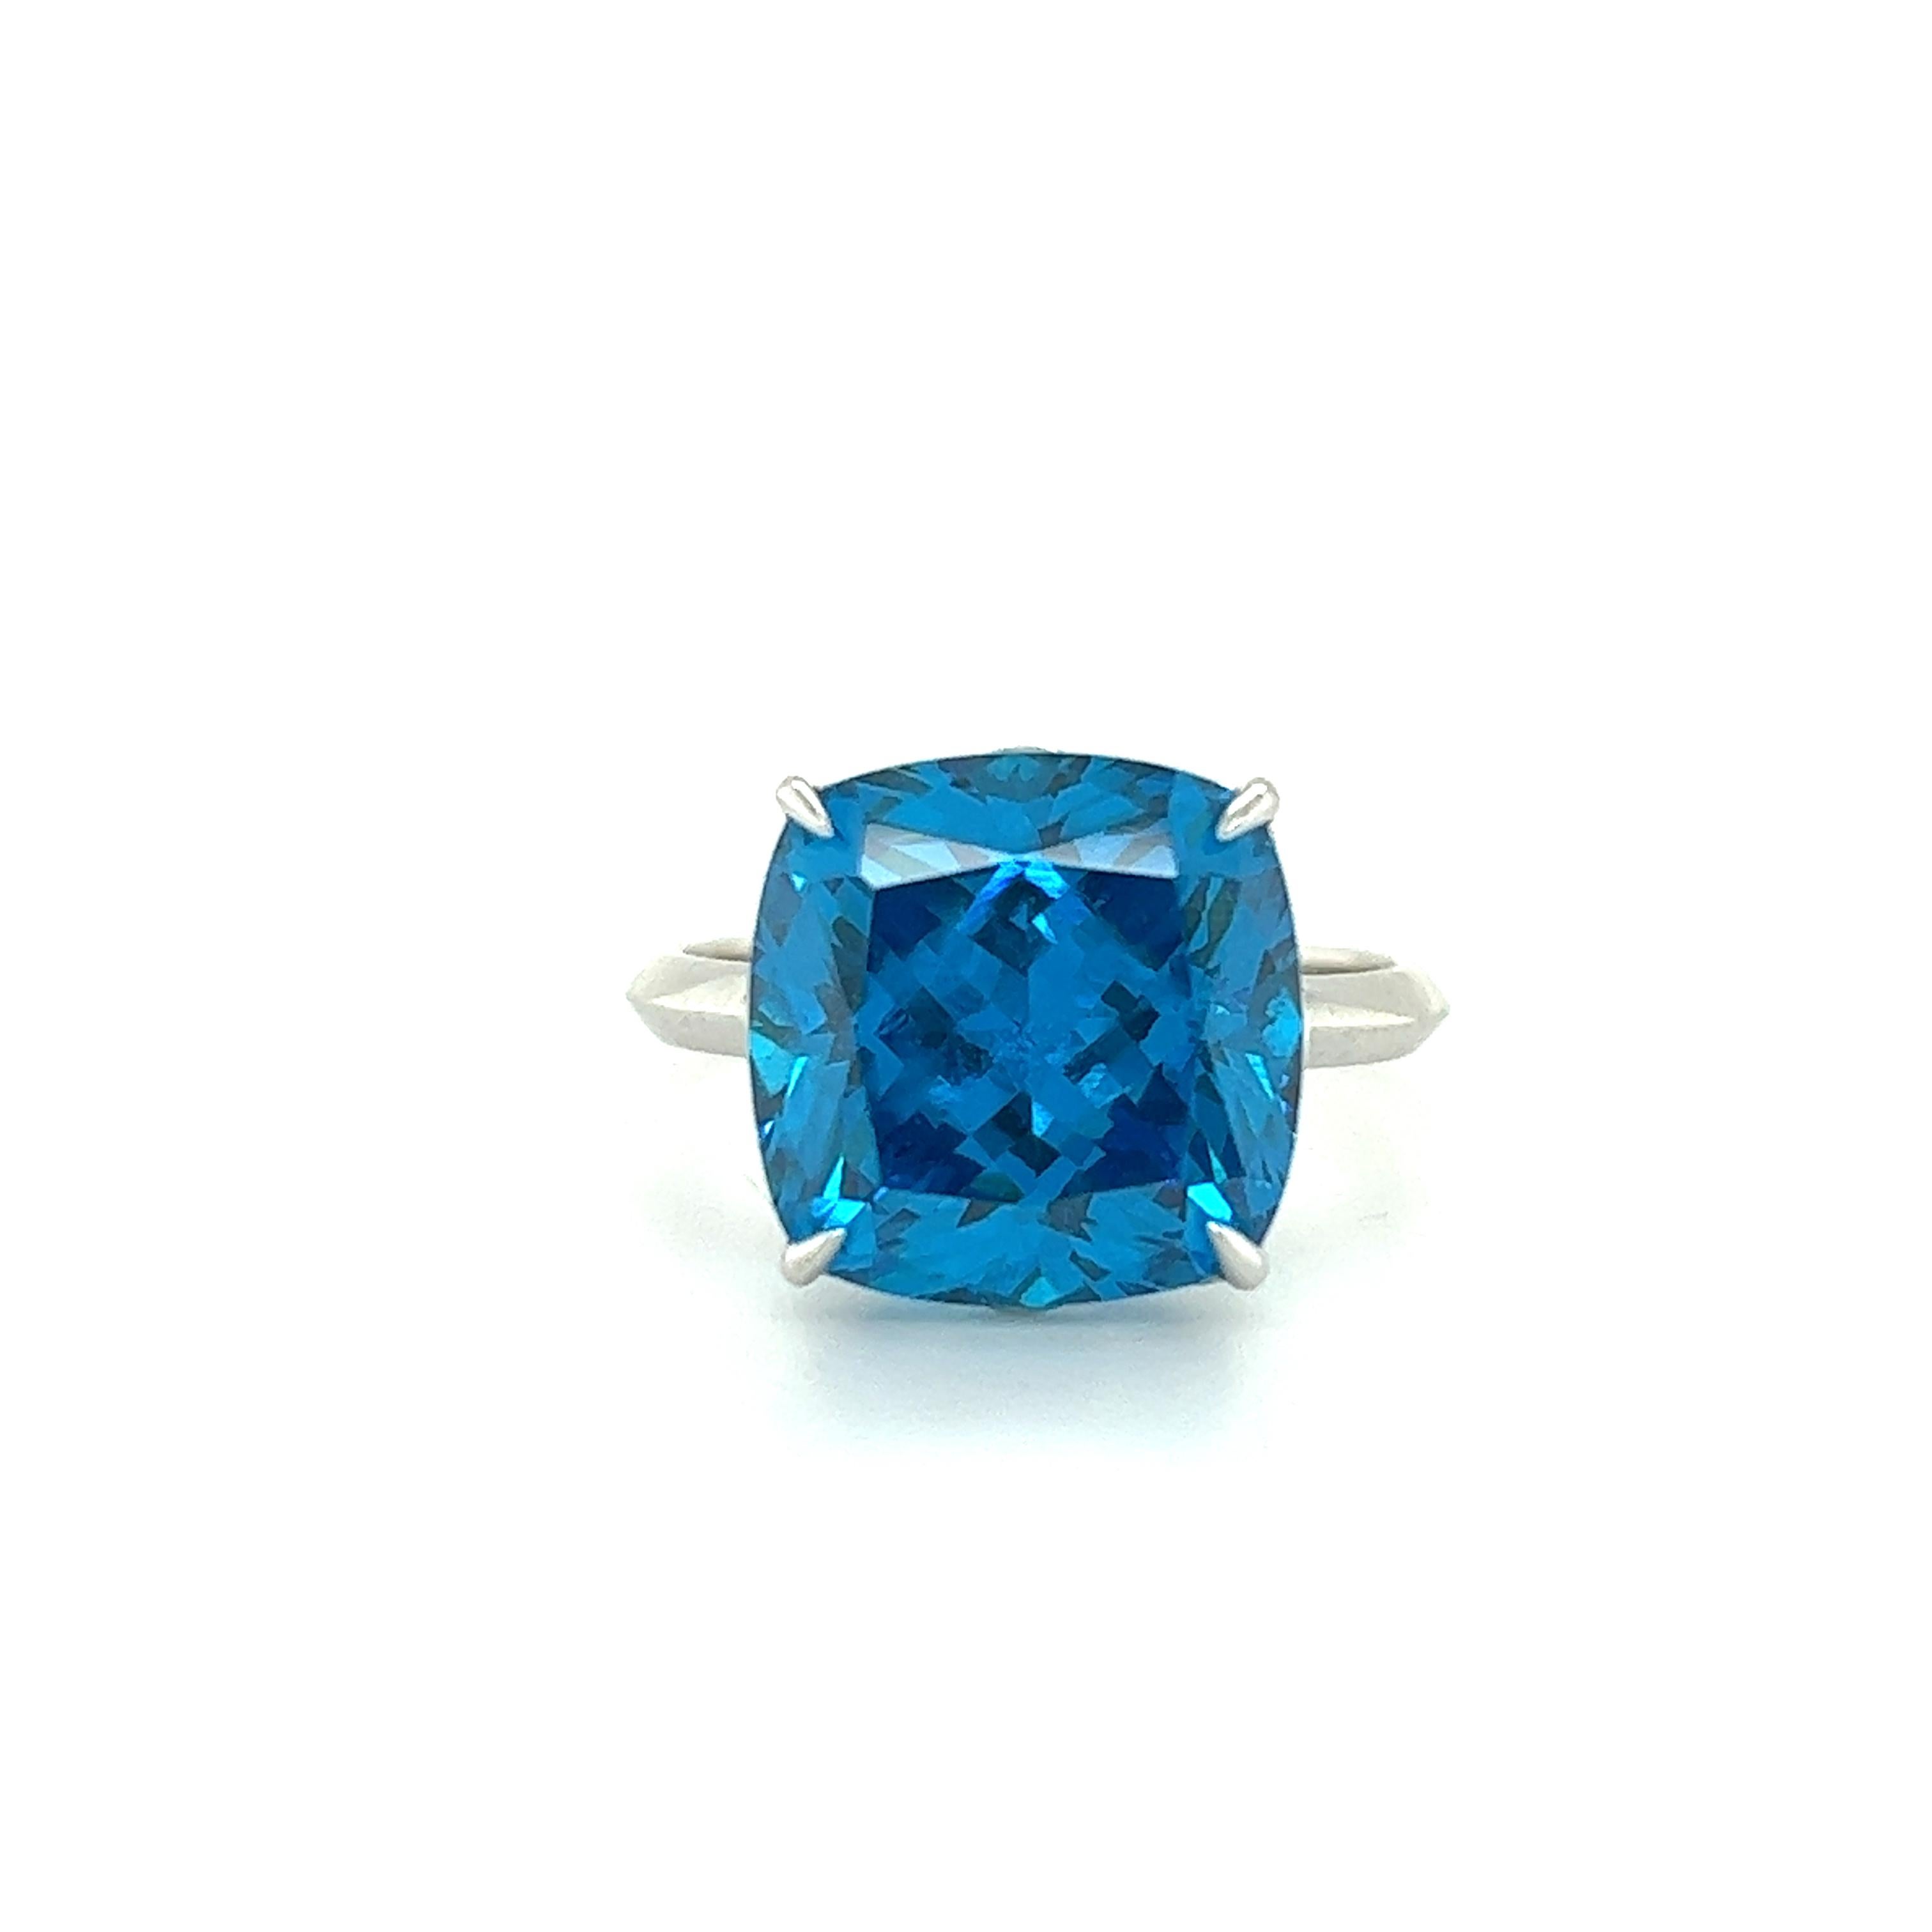 Beautiful ring crafted by famed designer Tiffany & Co. The ring is crafted in 18k white gold and highlights one electric colored blue topaz gemstone.  The design is simple, yet elegant as small details truly make this ring stand out. Sharp eagle